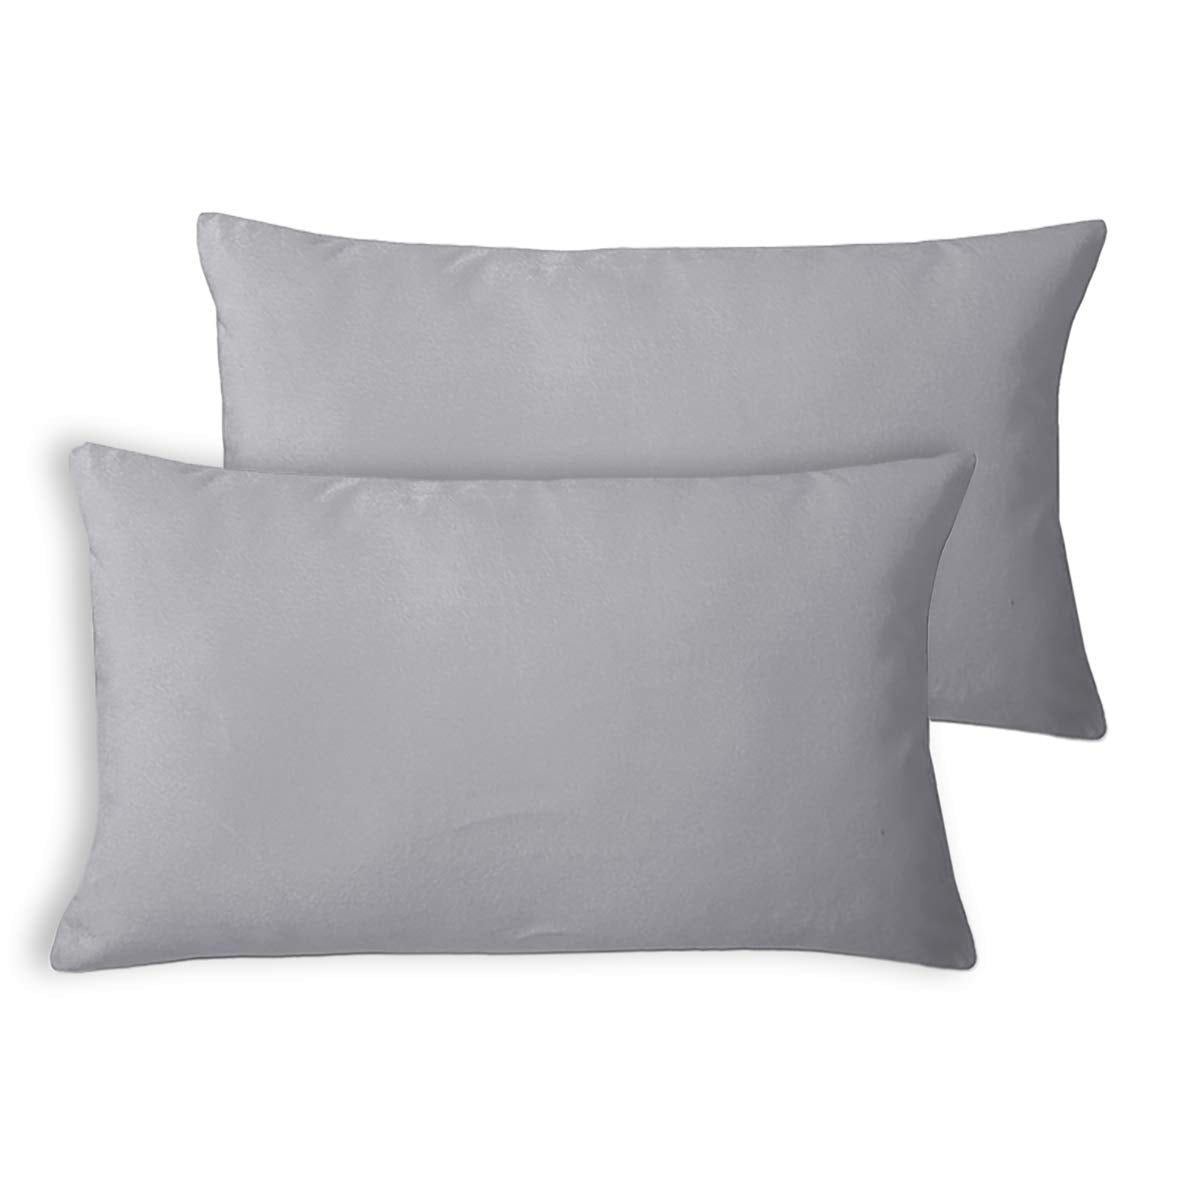 Encasa Homes Velvet Throw Pillow Cushion Covers 2 pc Set - Grey - 12"x20" / 30x50 cm Solid Plain Dyed Soft & Smooth, Square Accent Decorative Pillowcase for Couch, Sofa, Chair, Bed & Home